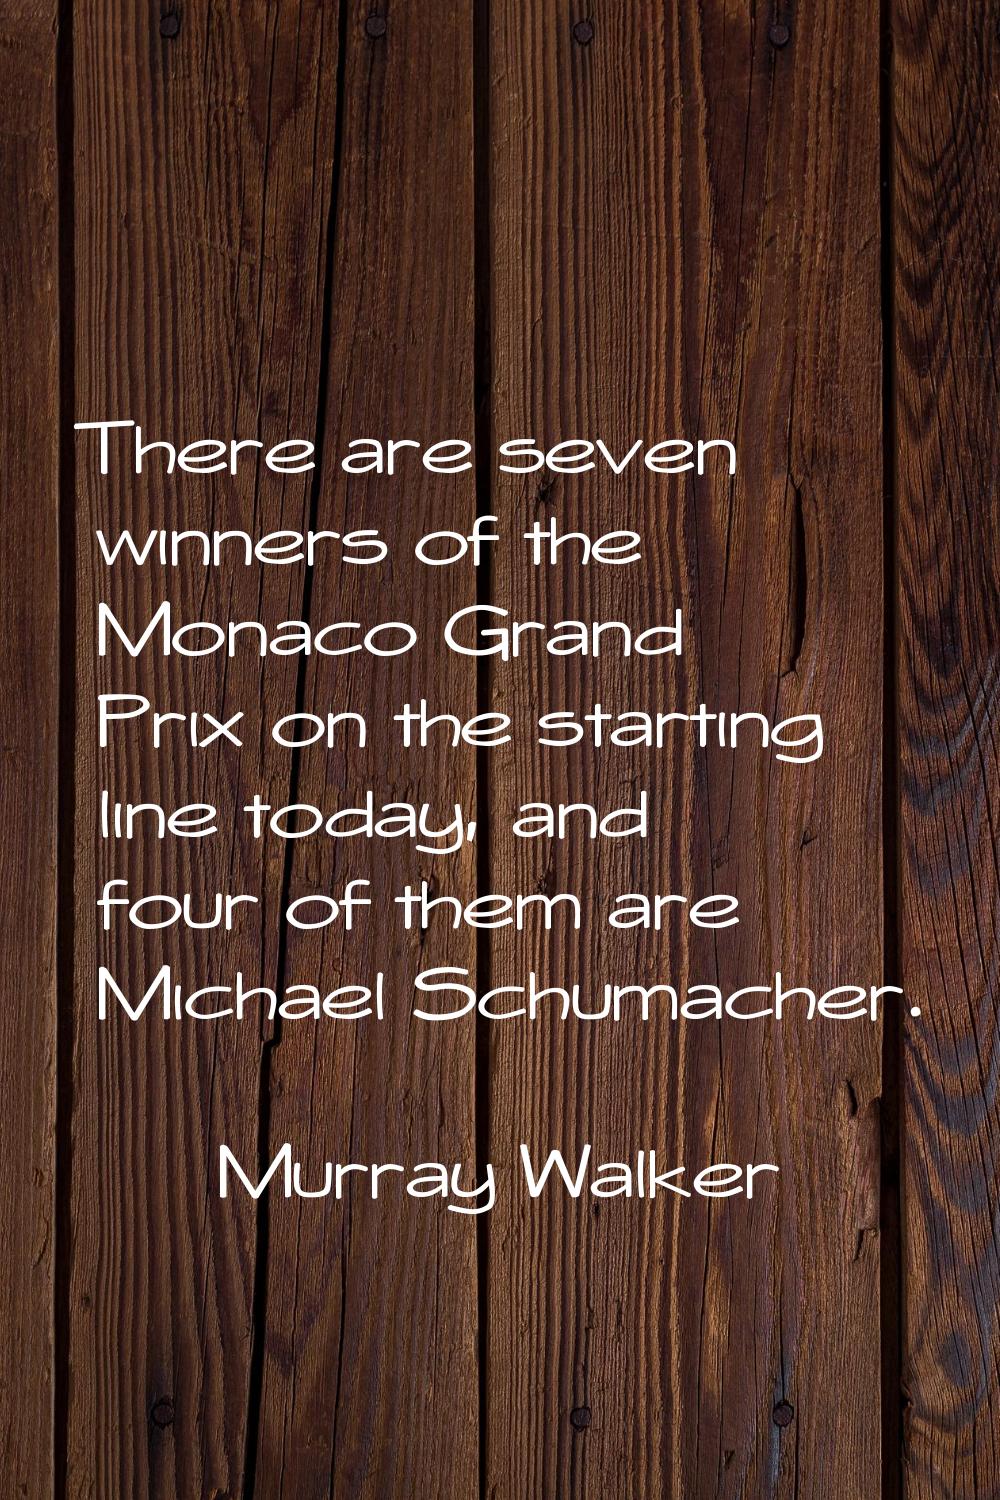 There are seven winners of the Monaco Grand Prix on the starting line today, and four of them are M